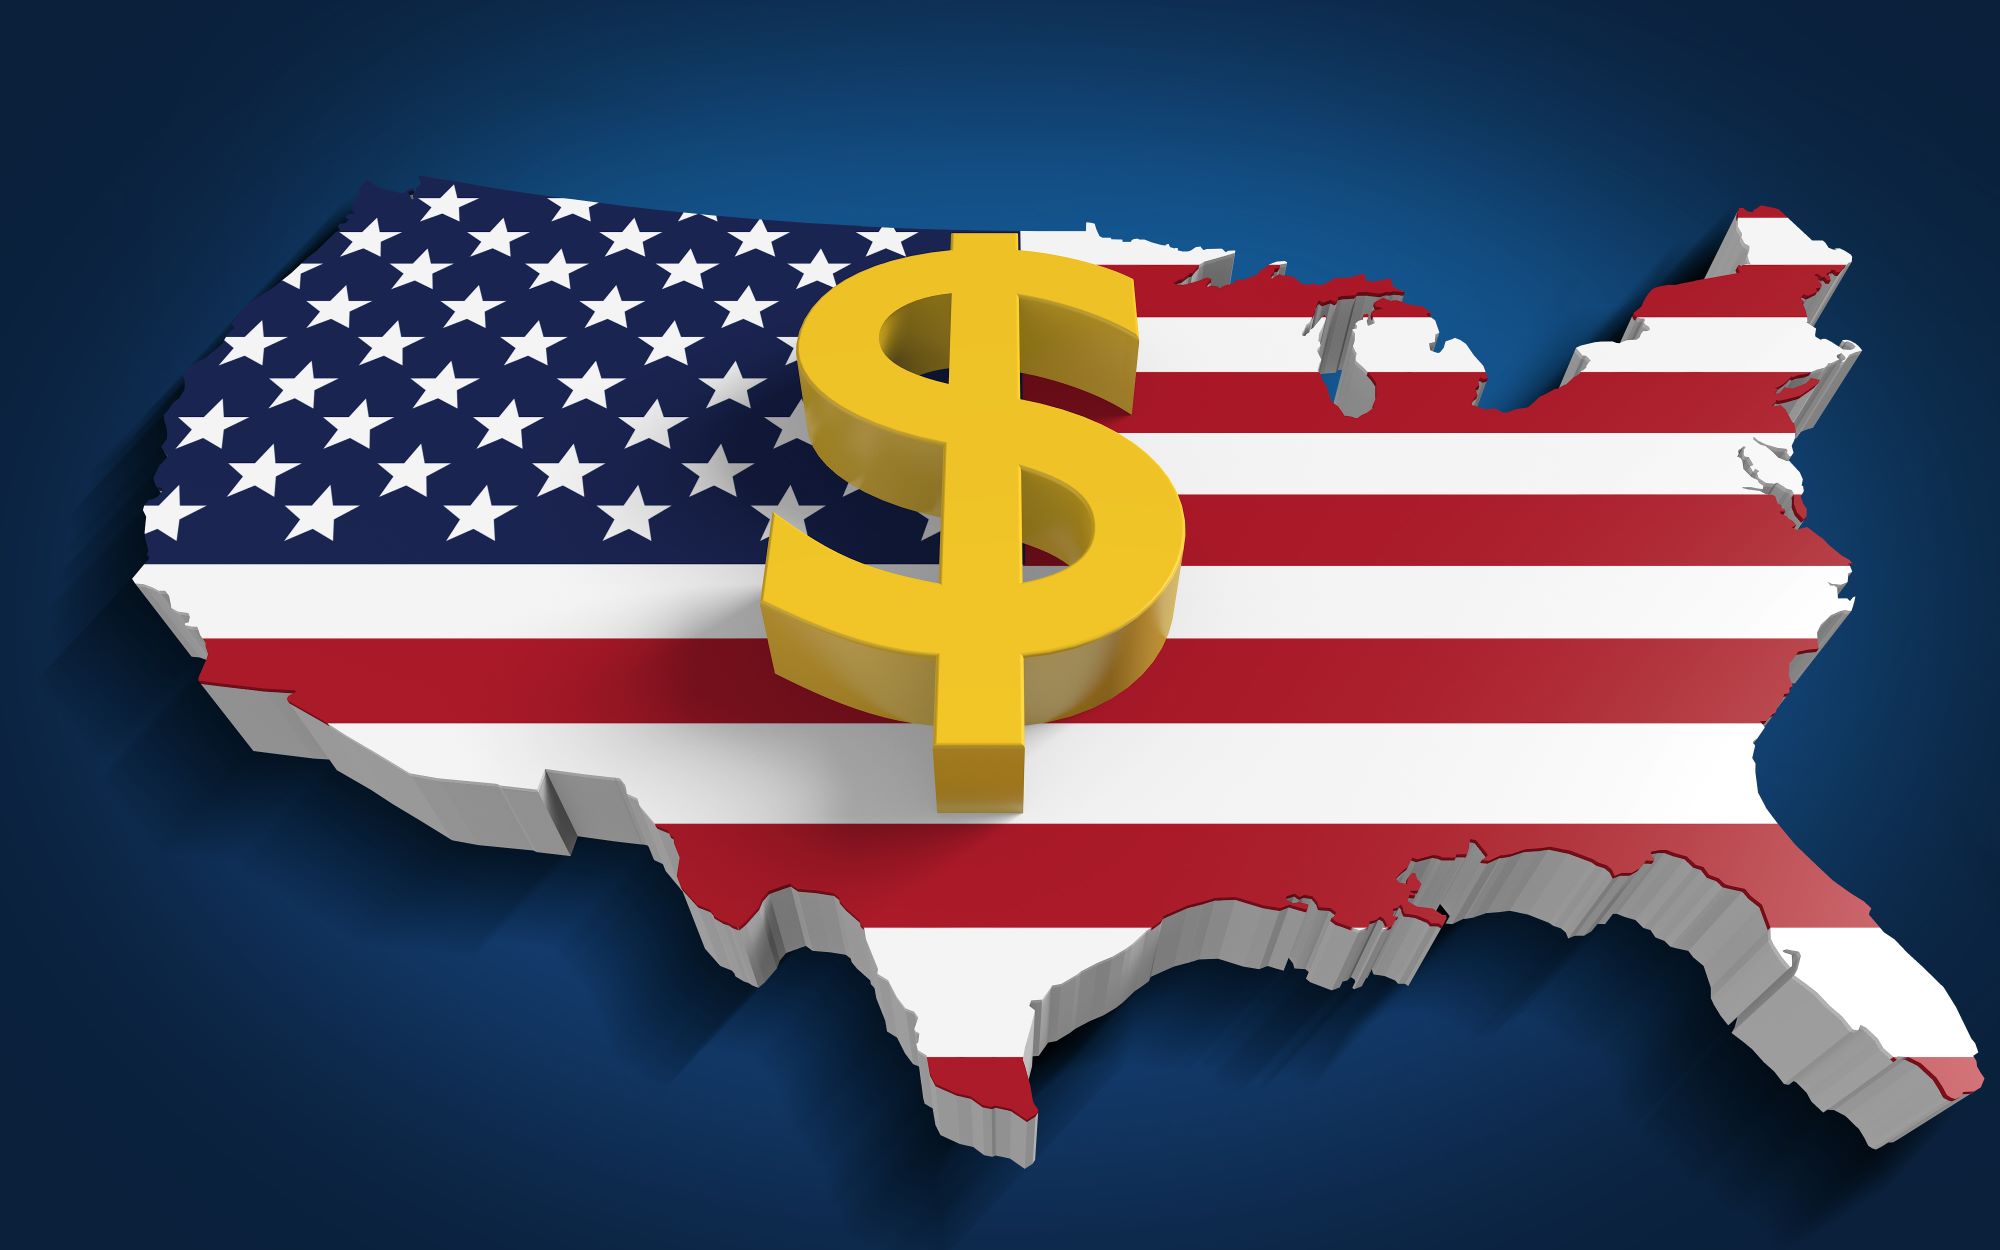 United States of America with flag coering all states and giant yellow dollar sign in the middle